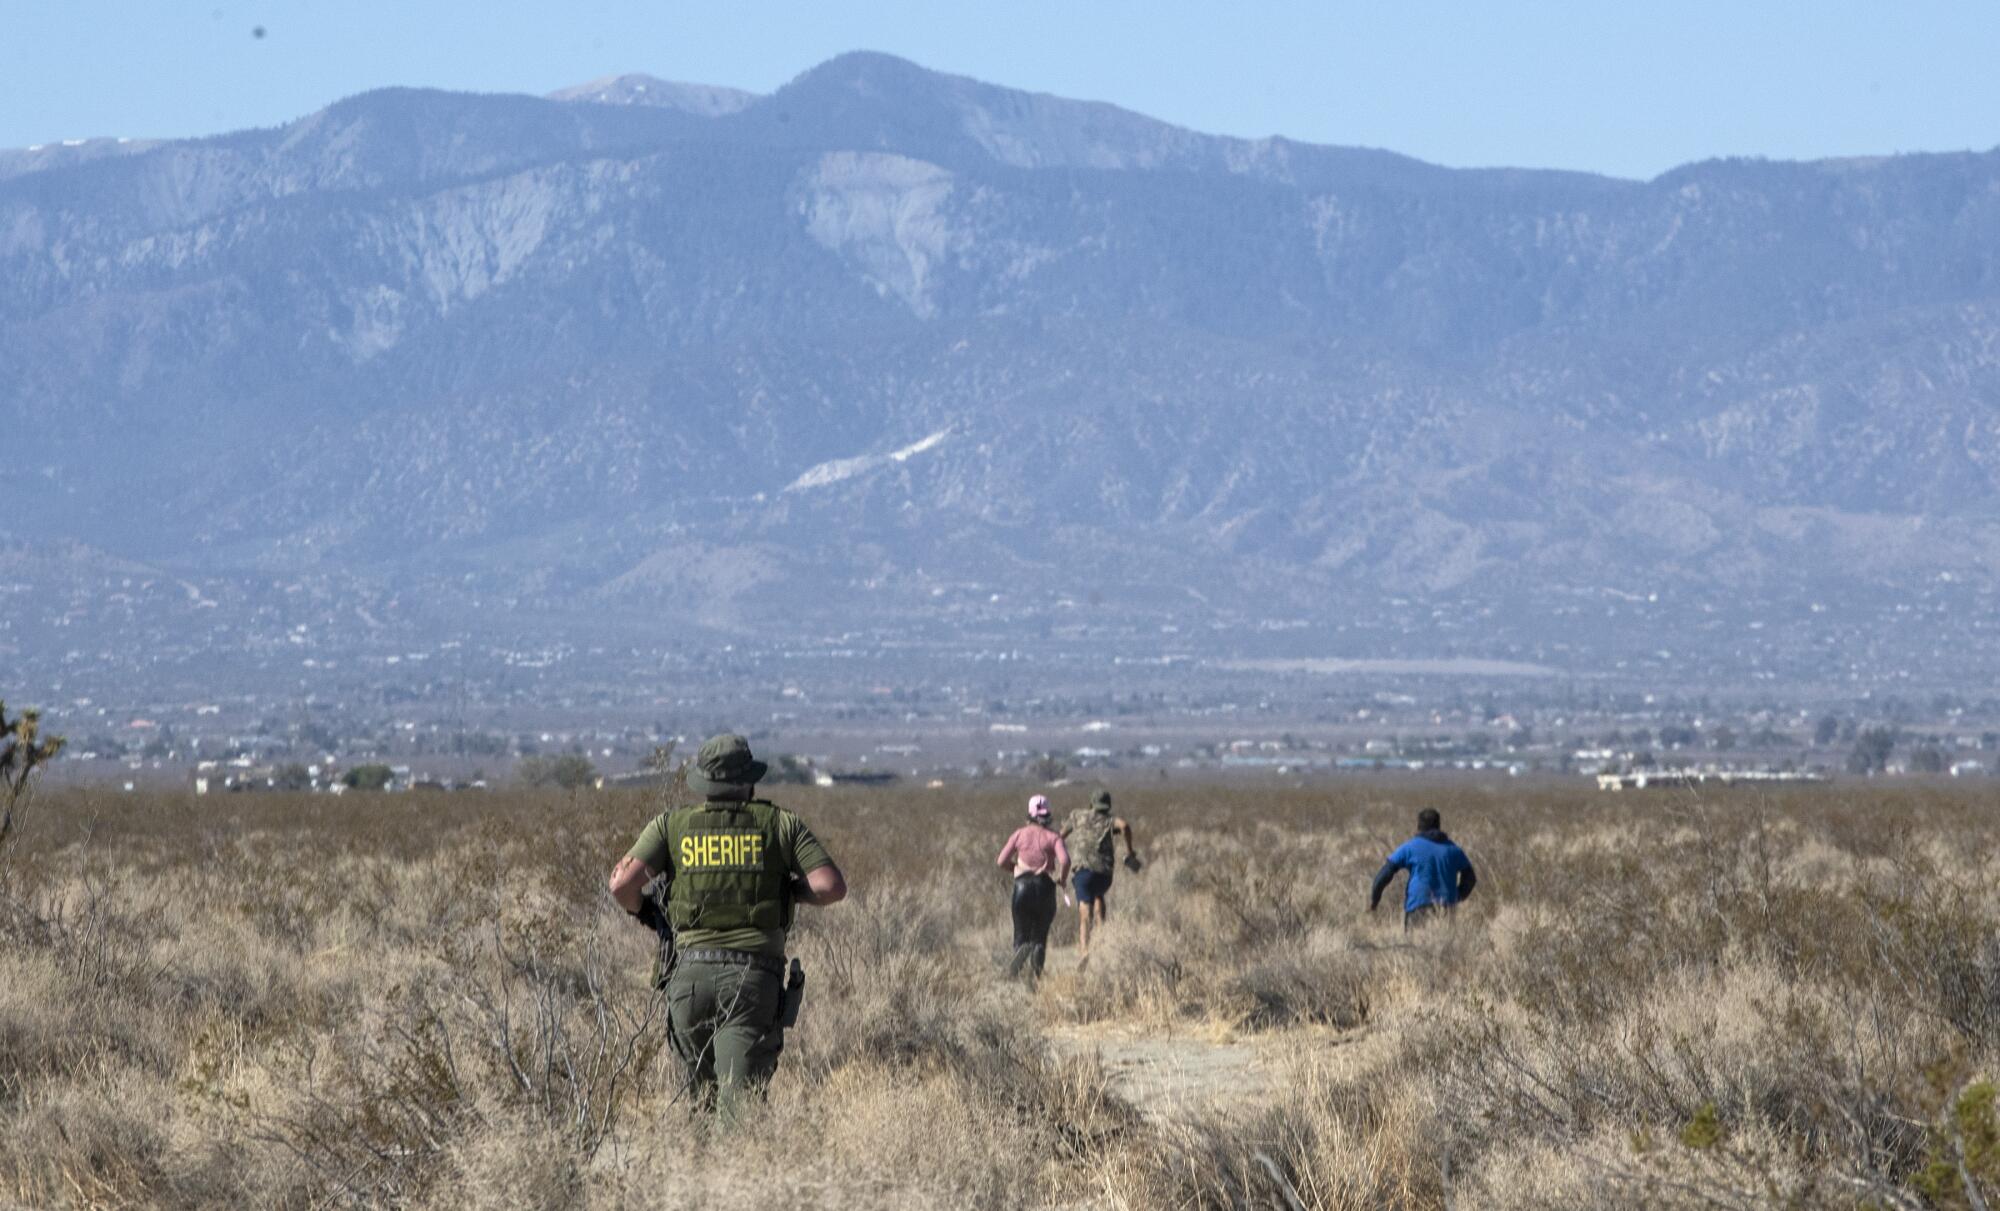 A San Bernardino County Sheriff's deputies chase workers at an illegal cannabis grow.